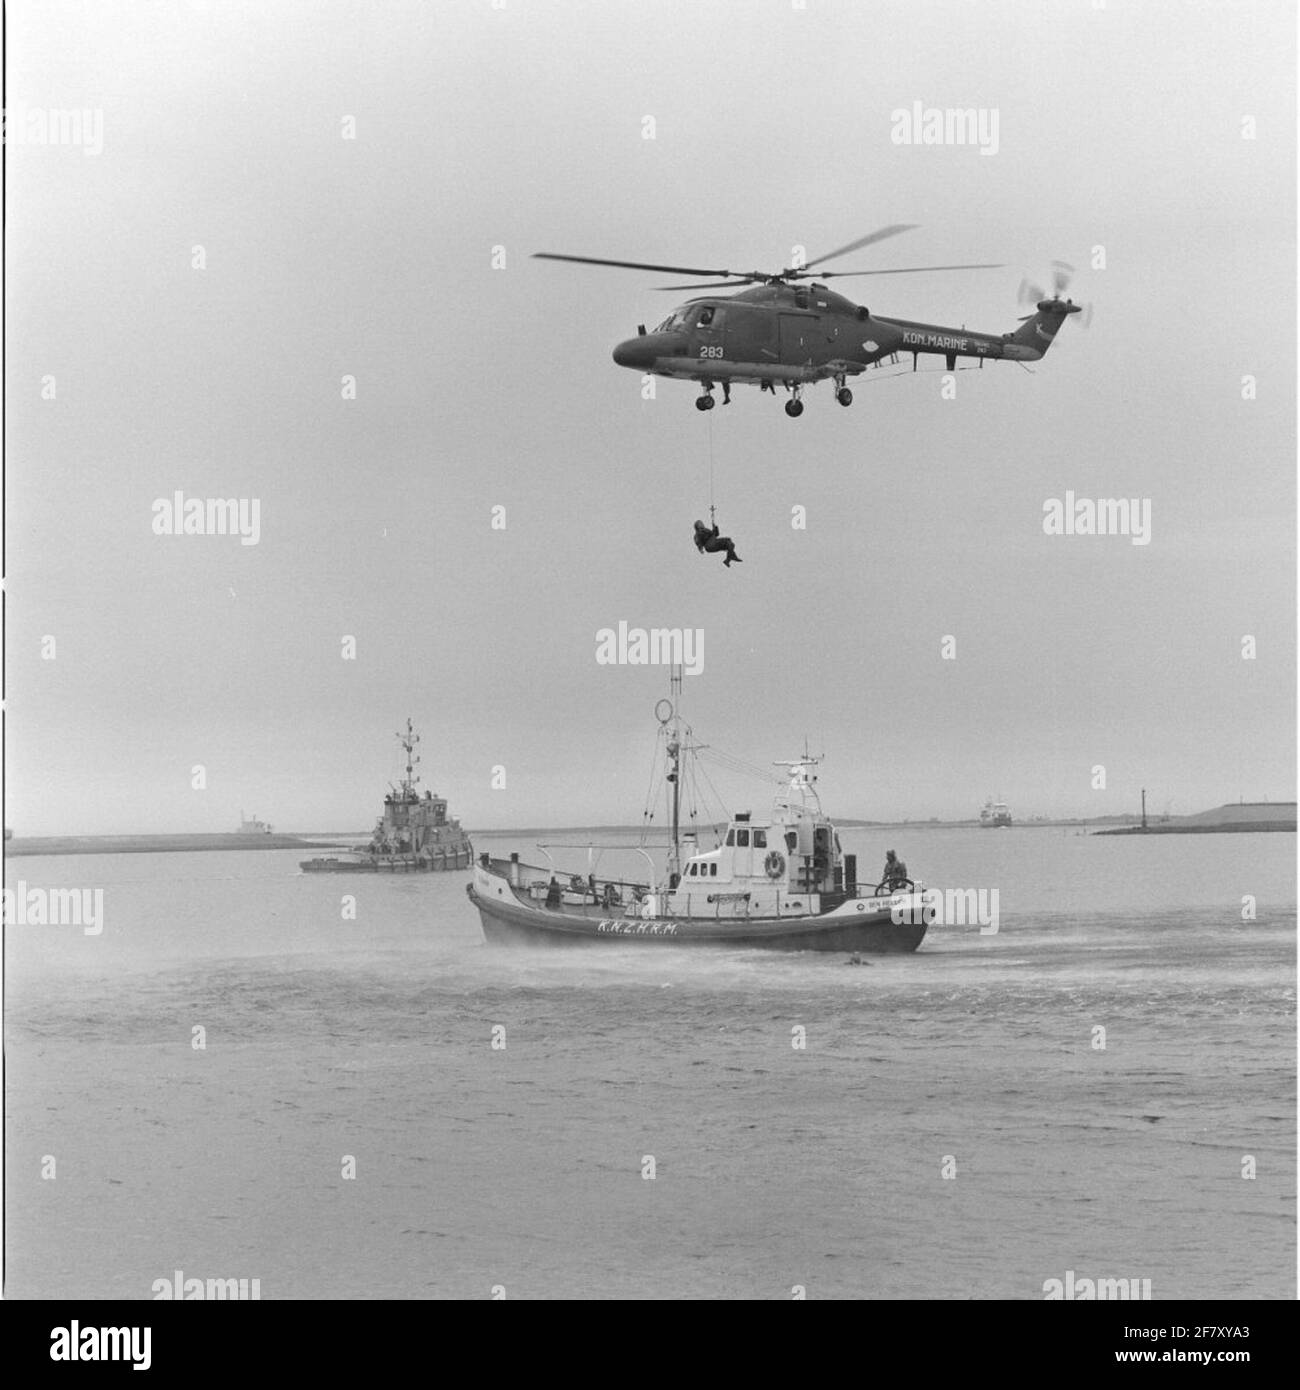 Exercise Person transport From a floating platform by the Westland SH-14D Navy Lynx Helicopter with registration 283 (1981-approx. 2012) in collaboration with the bright rescue boat Suzanna (1968-1998) of the Royal North and South Holland Redding Company (Knzhrm) In May 1990. On the background a marine trail from the Delta Tug 2750 type (1987-). Stock Photo